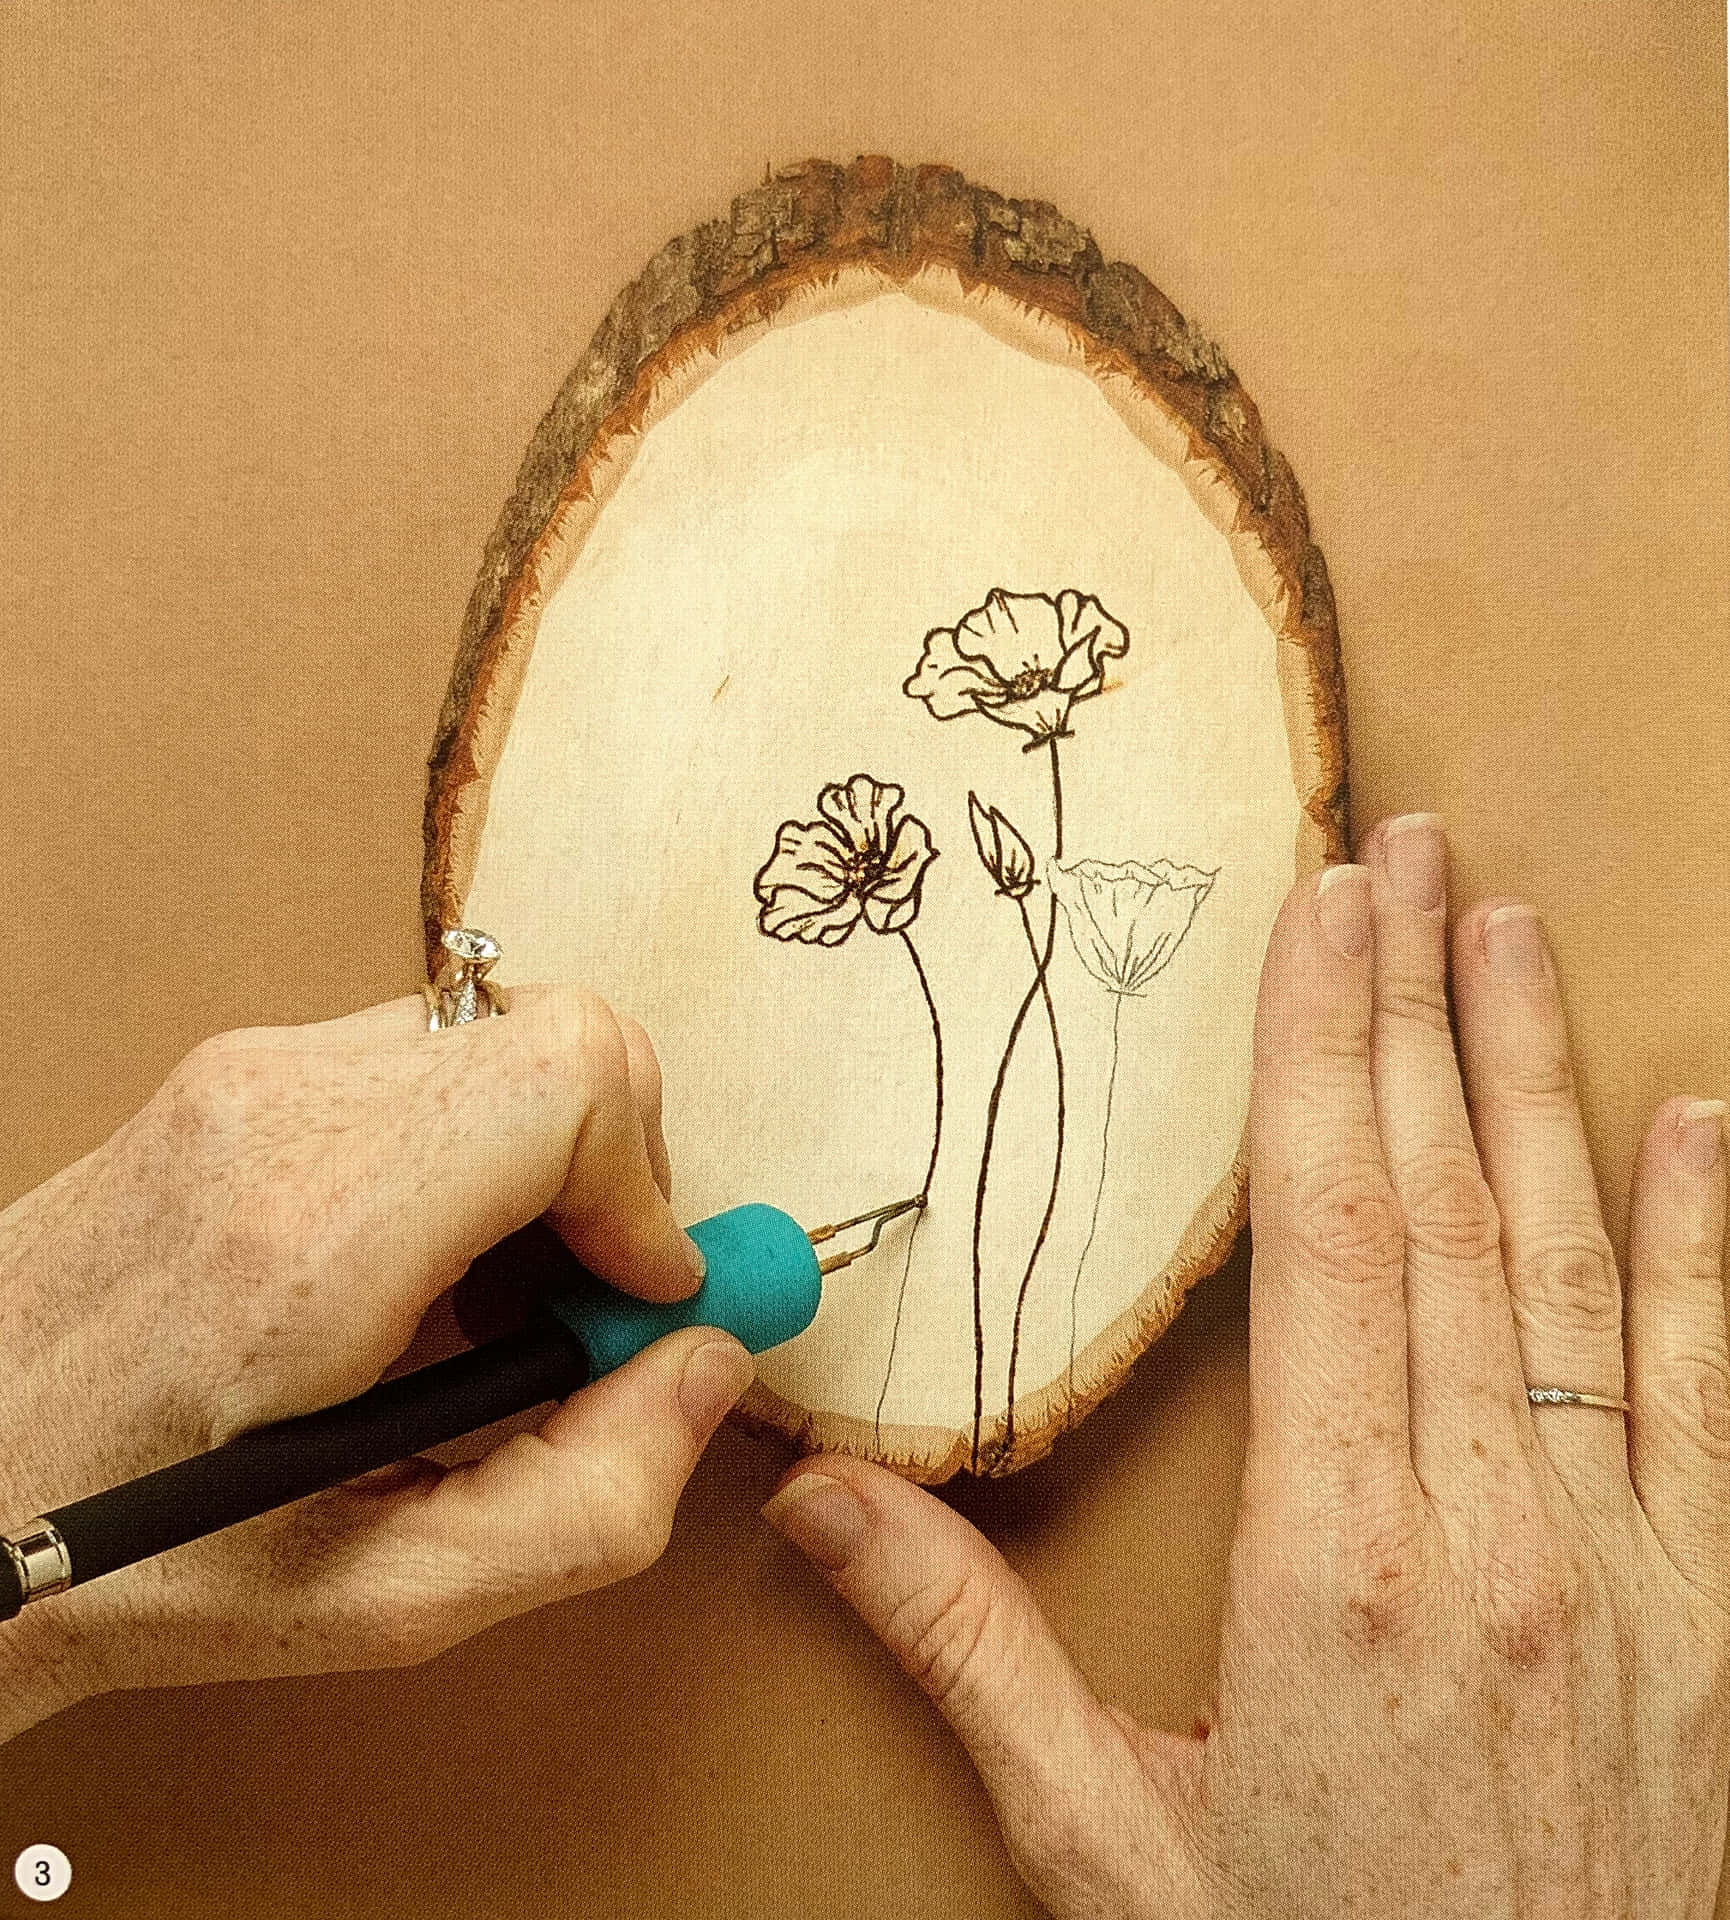 A gorgeous wood burning design, crafted in real time